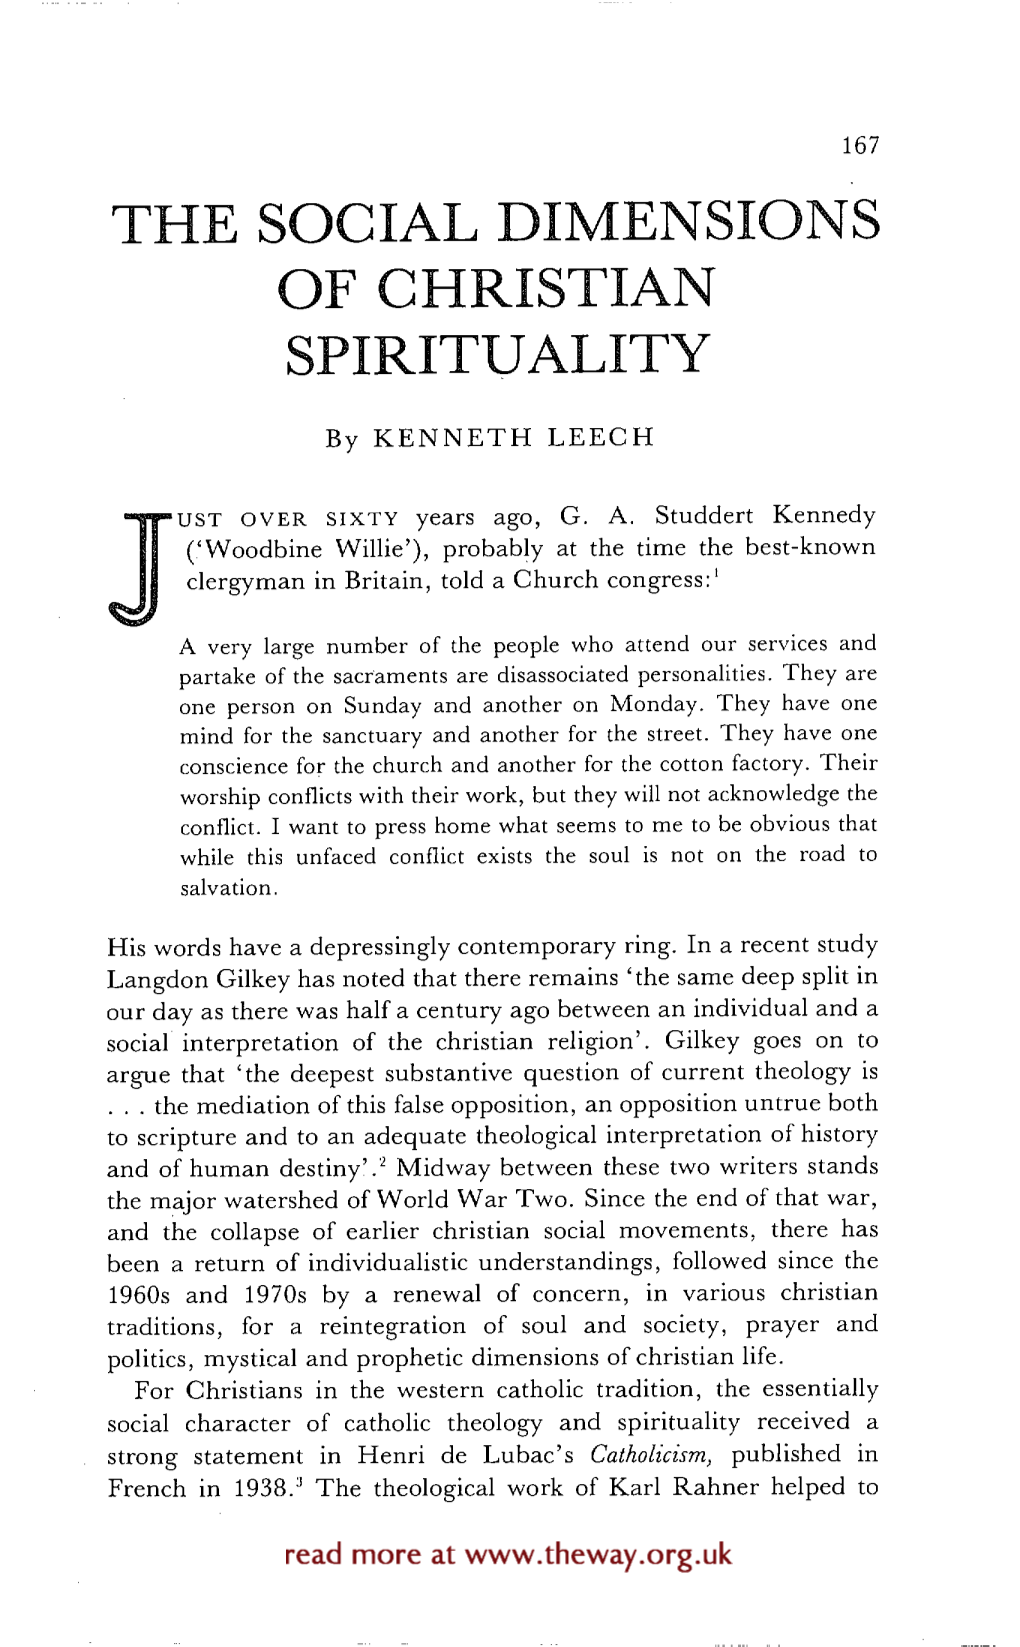 The Social Dimensions of Christian Spirituality